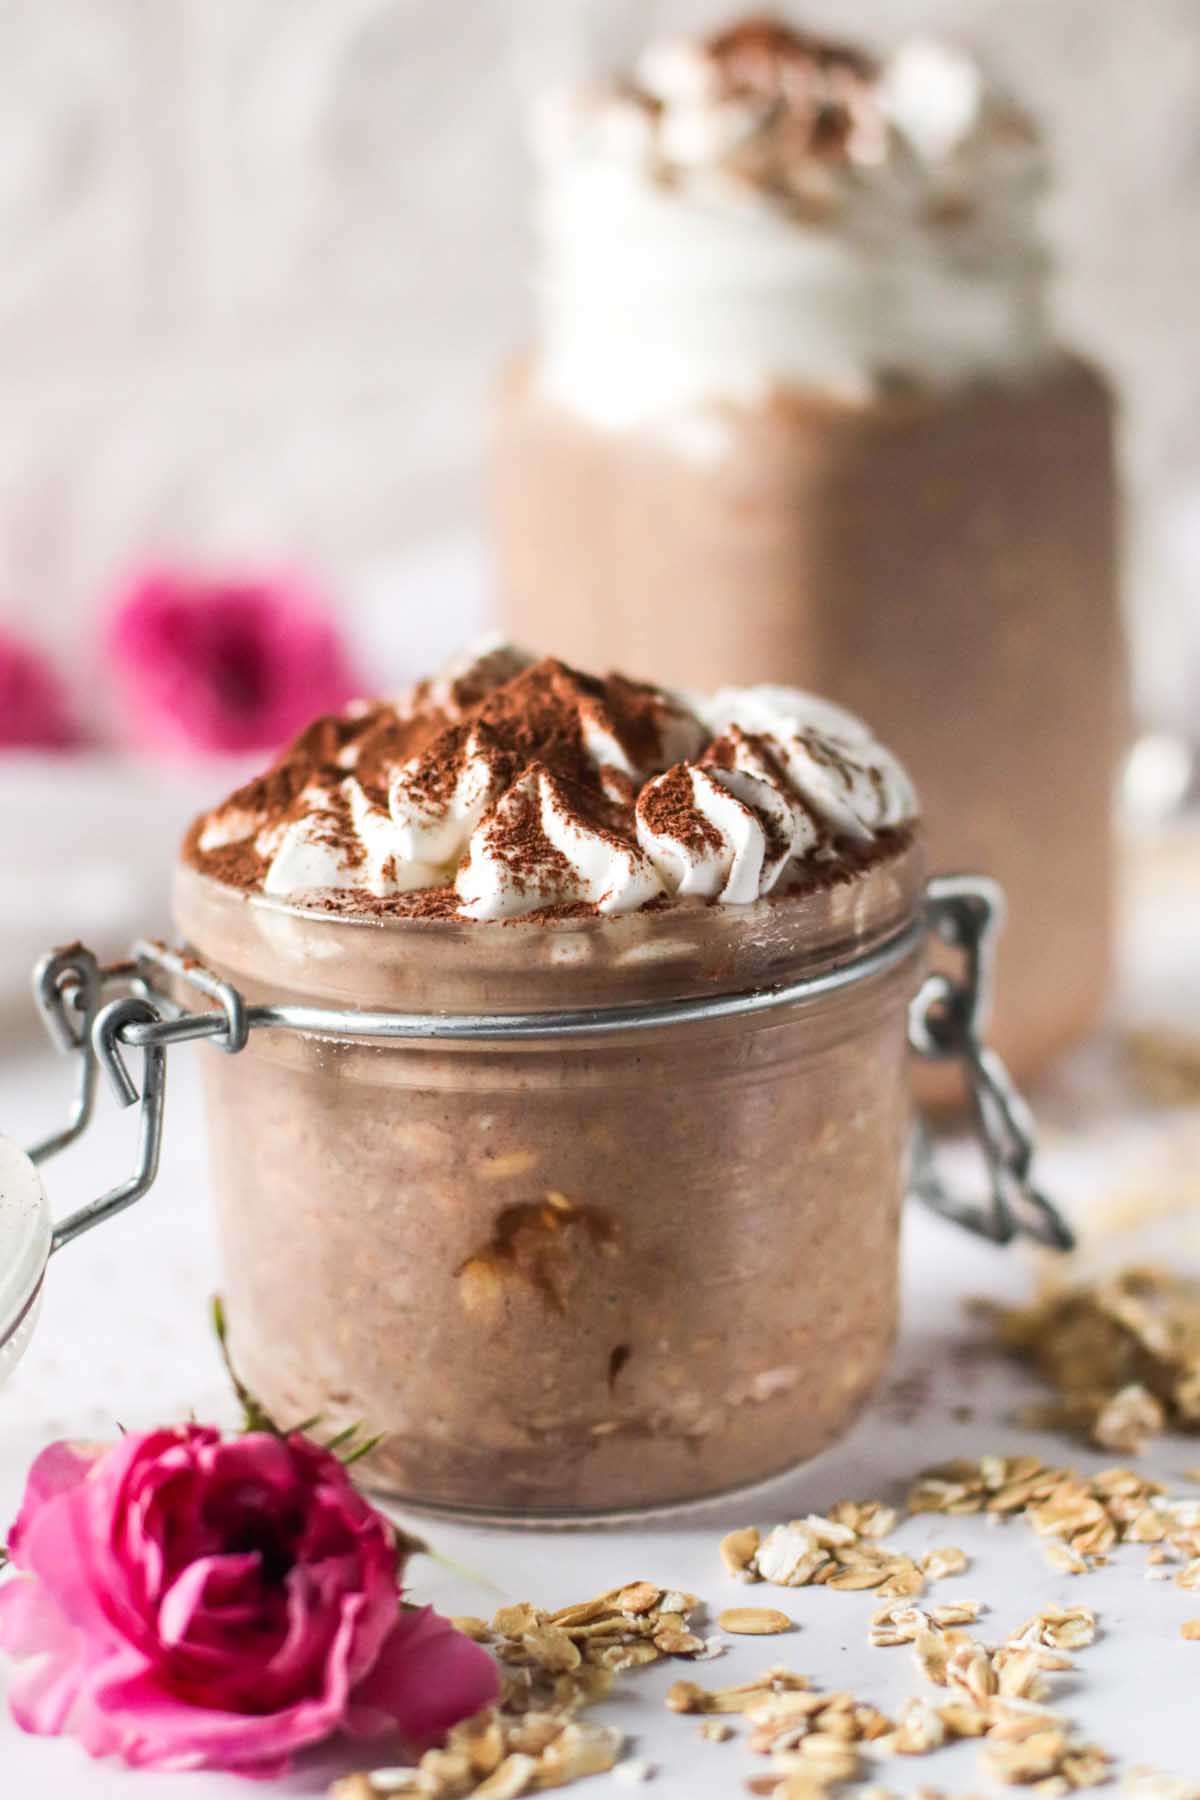 Overnight oats in a jar with whipped cream on top.